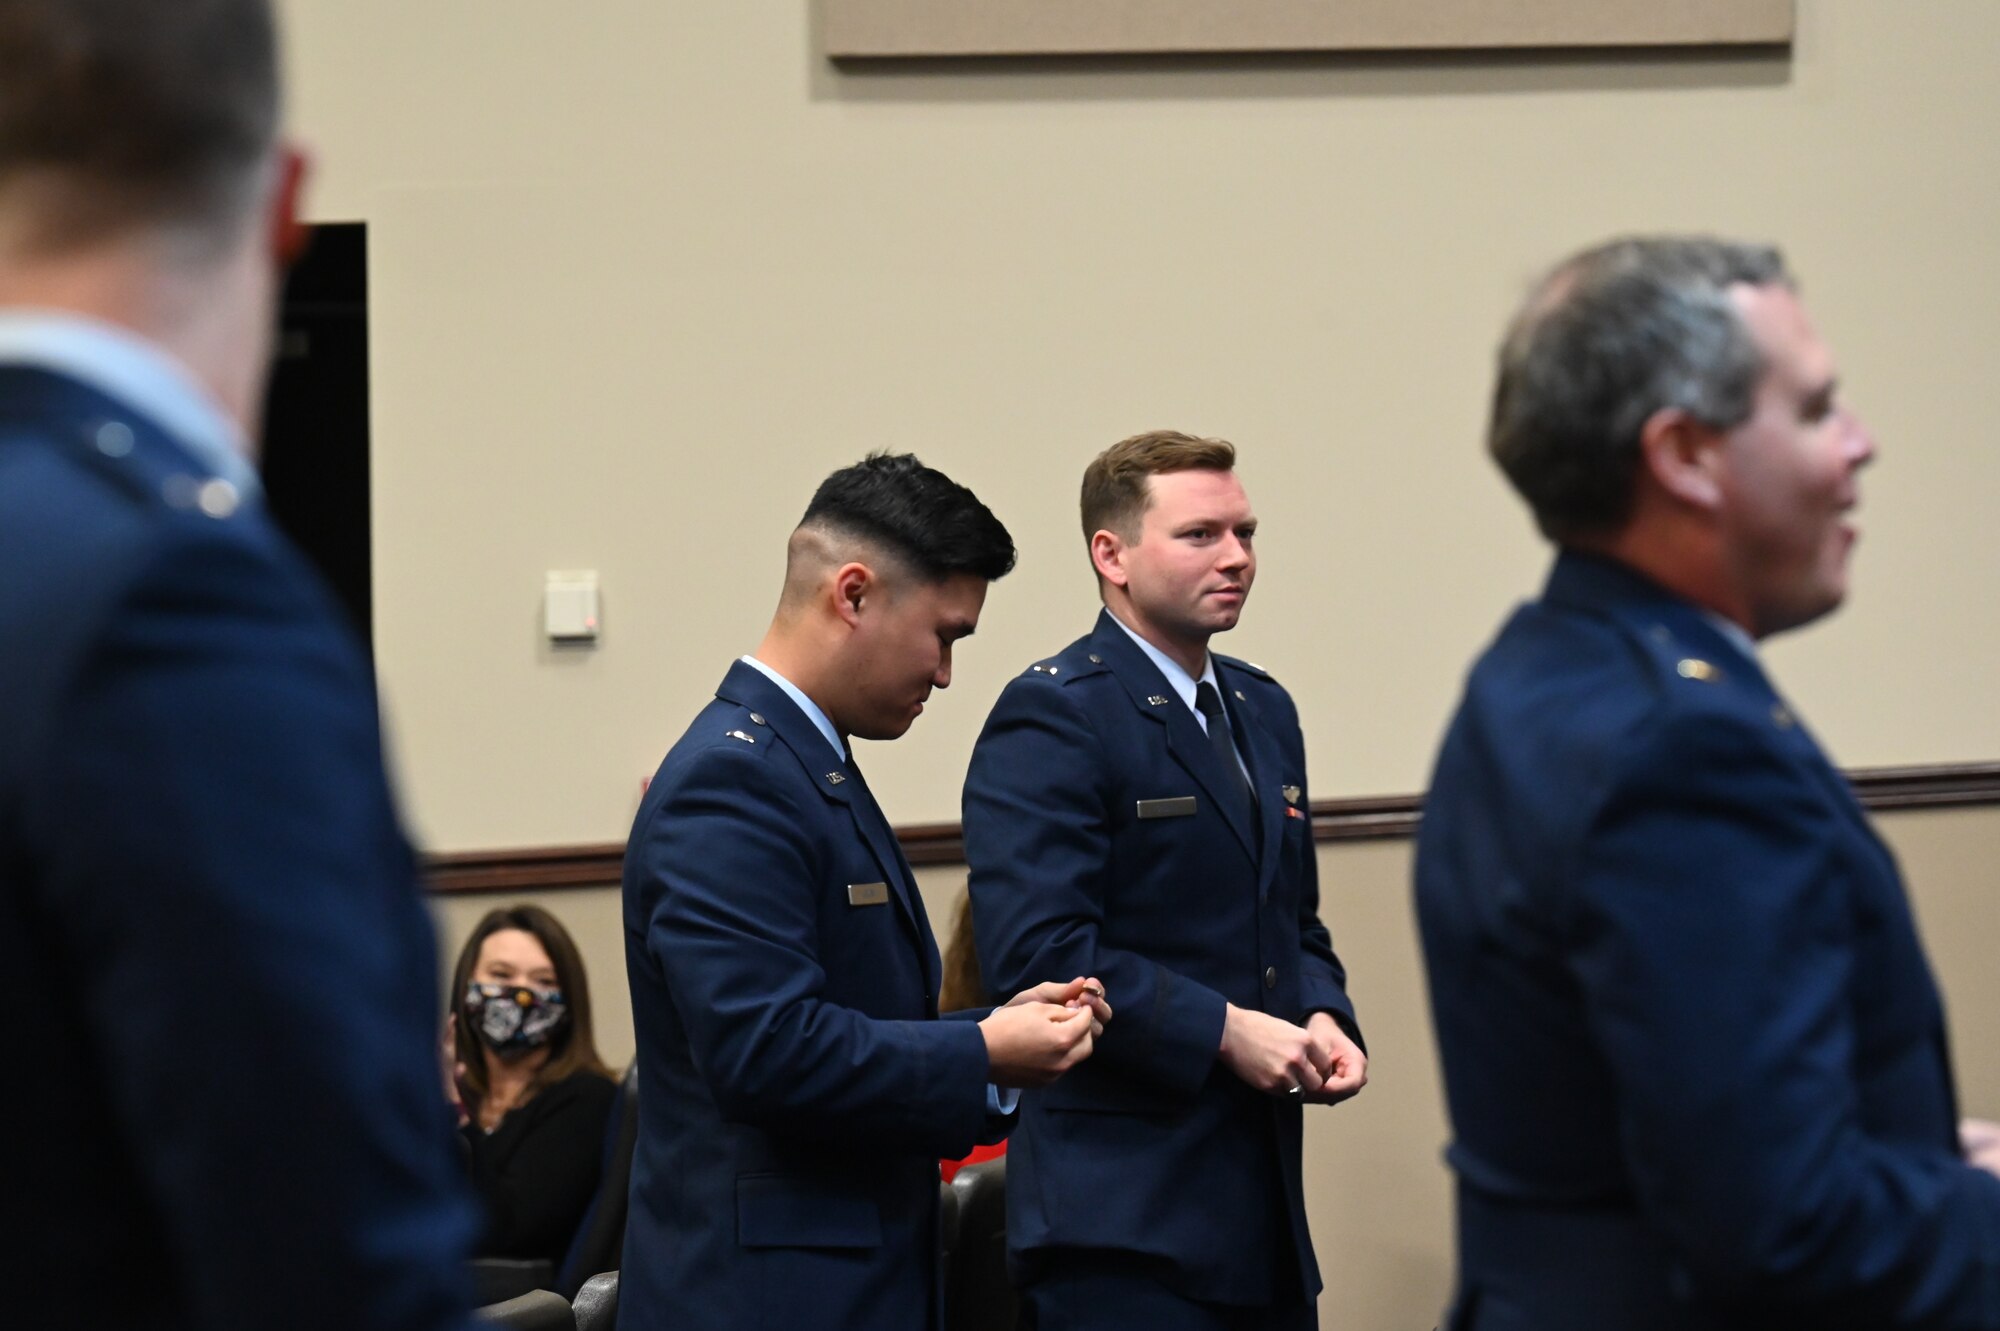 Graduated students from Specialized Undergraduate Pilot Training class 21-04, hold their freshly broken wings, Jan. 15, 2020, on Columbus Air Force Base, Miss. Fifteen officers were awarded their silver wings at the ceremony and gained the title of “Air Force Pilot”. (U.S. Air Force photo by Airman 1st Class Jessica Haynie)